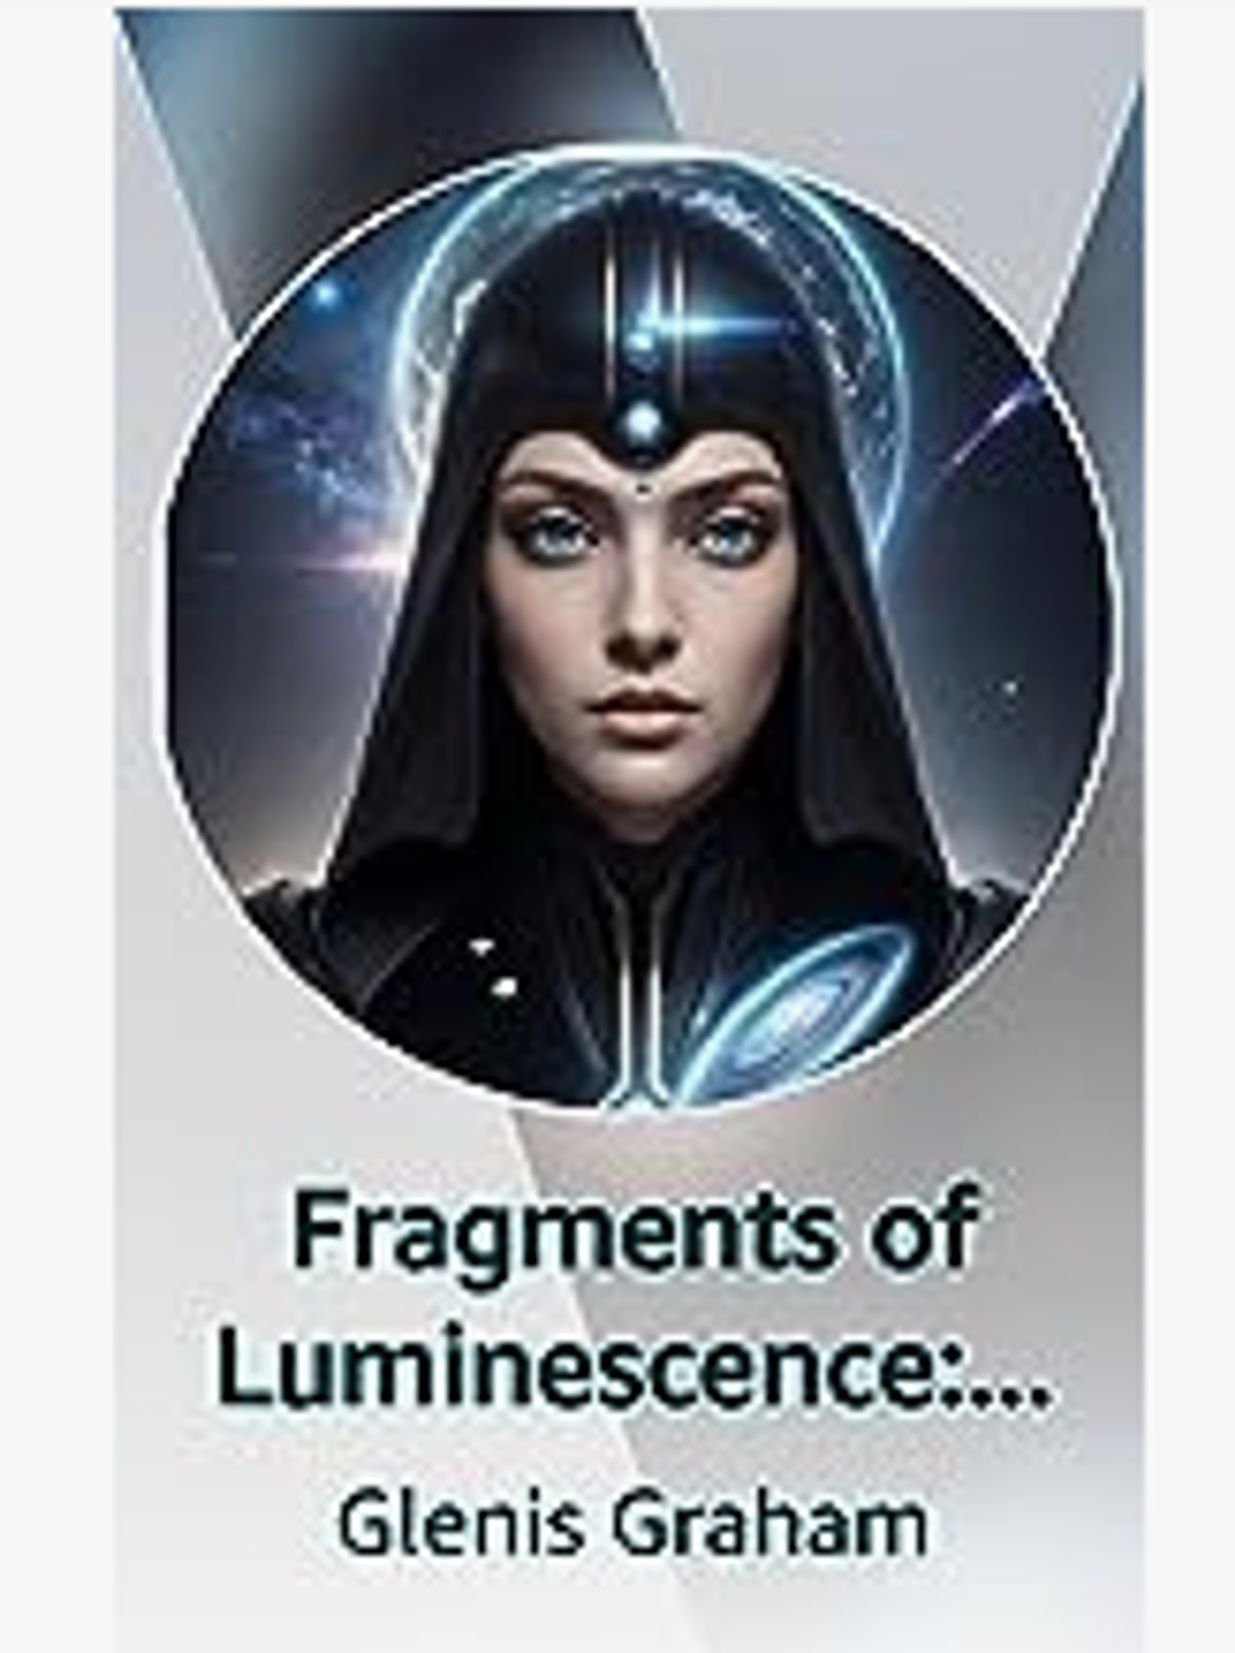 Fragments of Luminescence: LORD Chronicles Revealed
by Glenis Graham (Author)